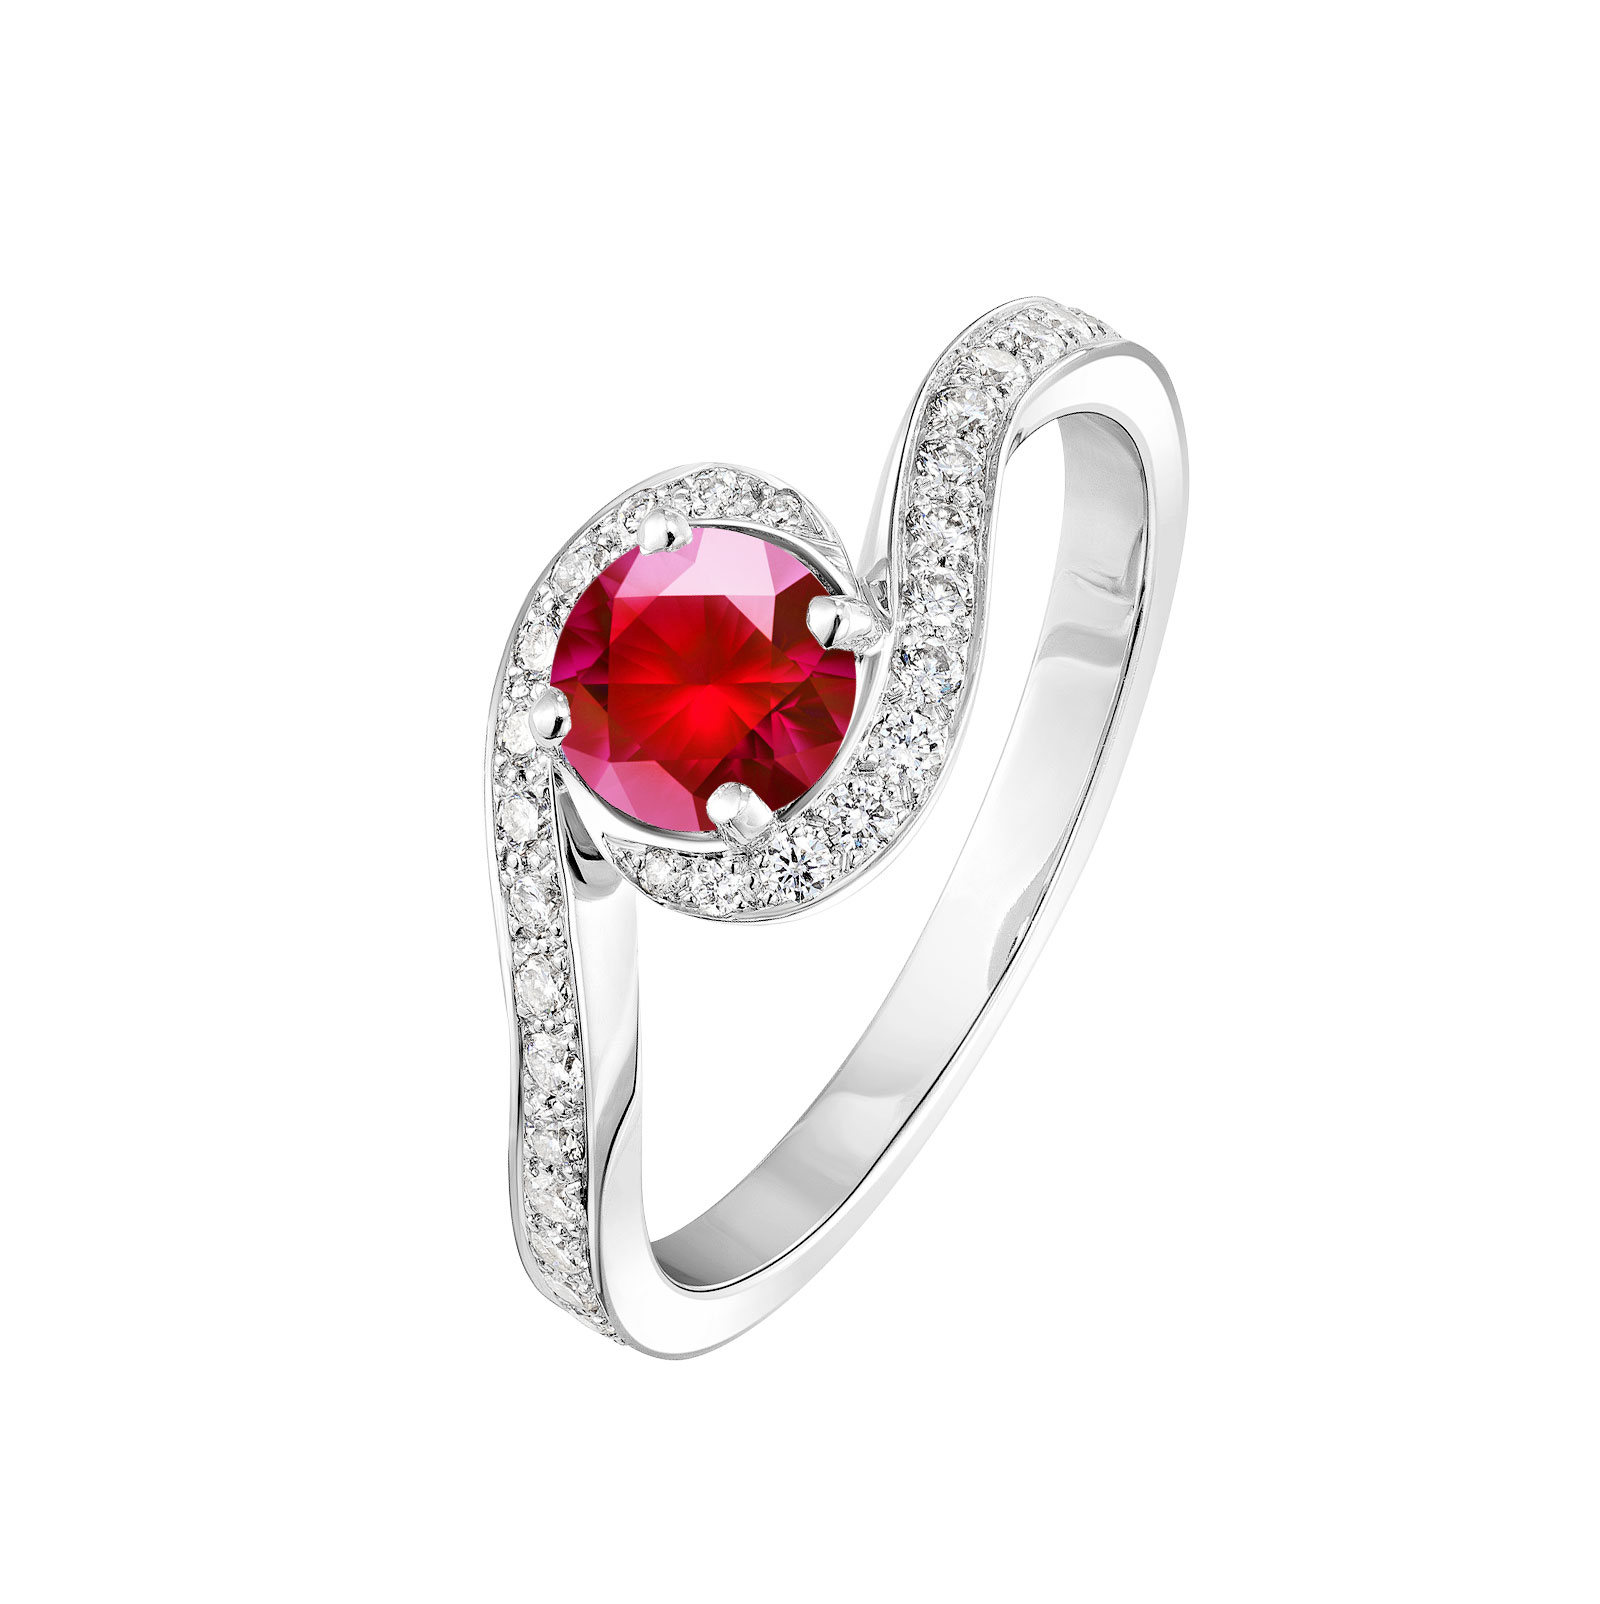 Ring White gold Ruby and diamonds Amelia 1